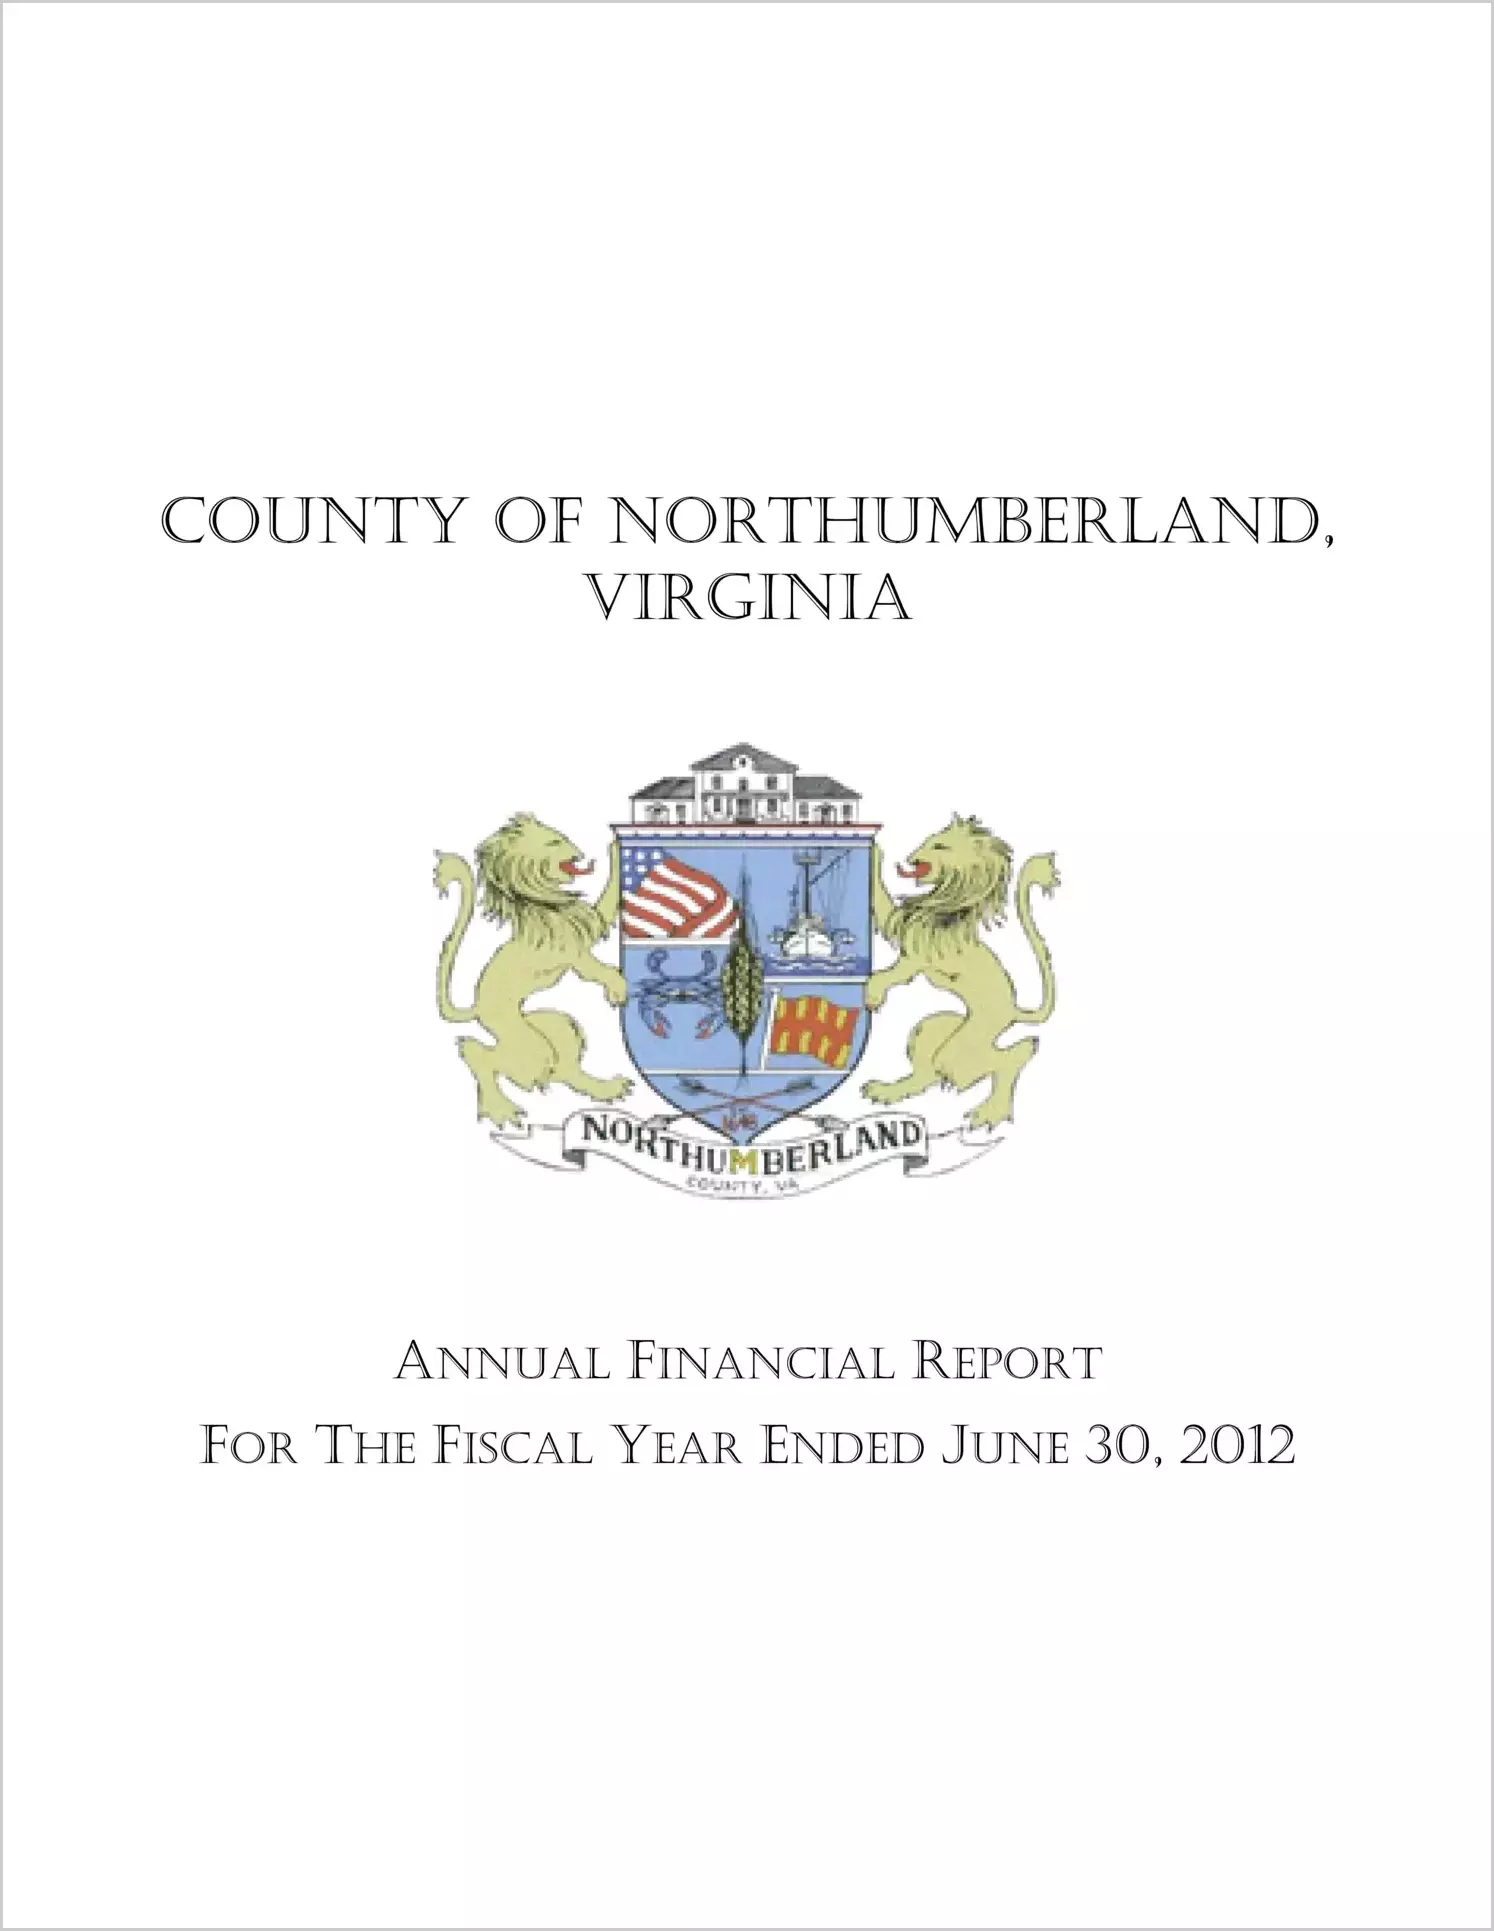 2012 Annual Financial Report for County of Northumberland